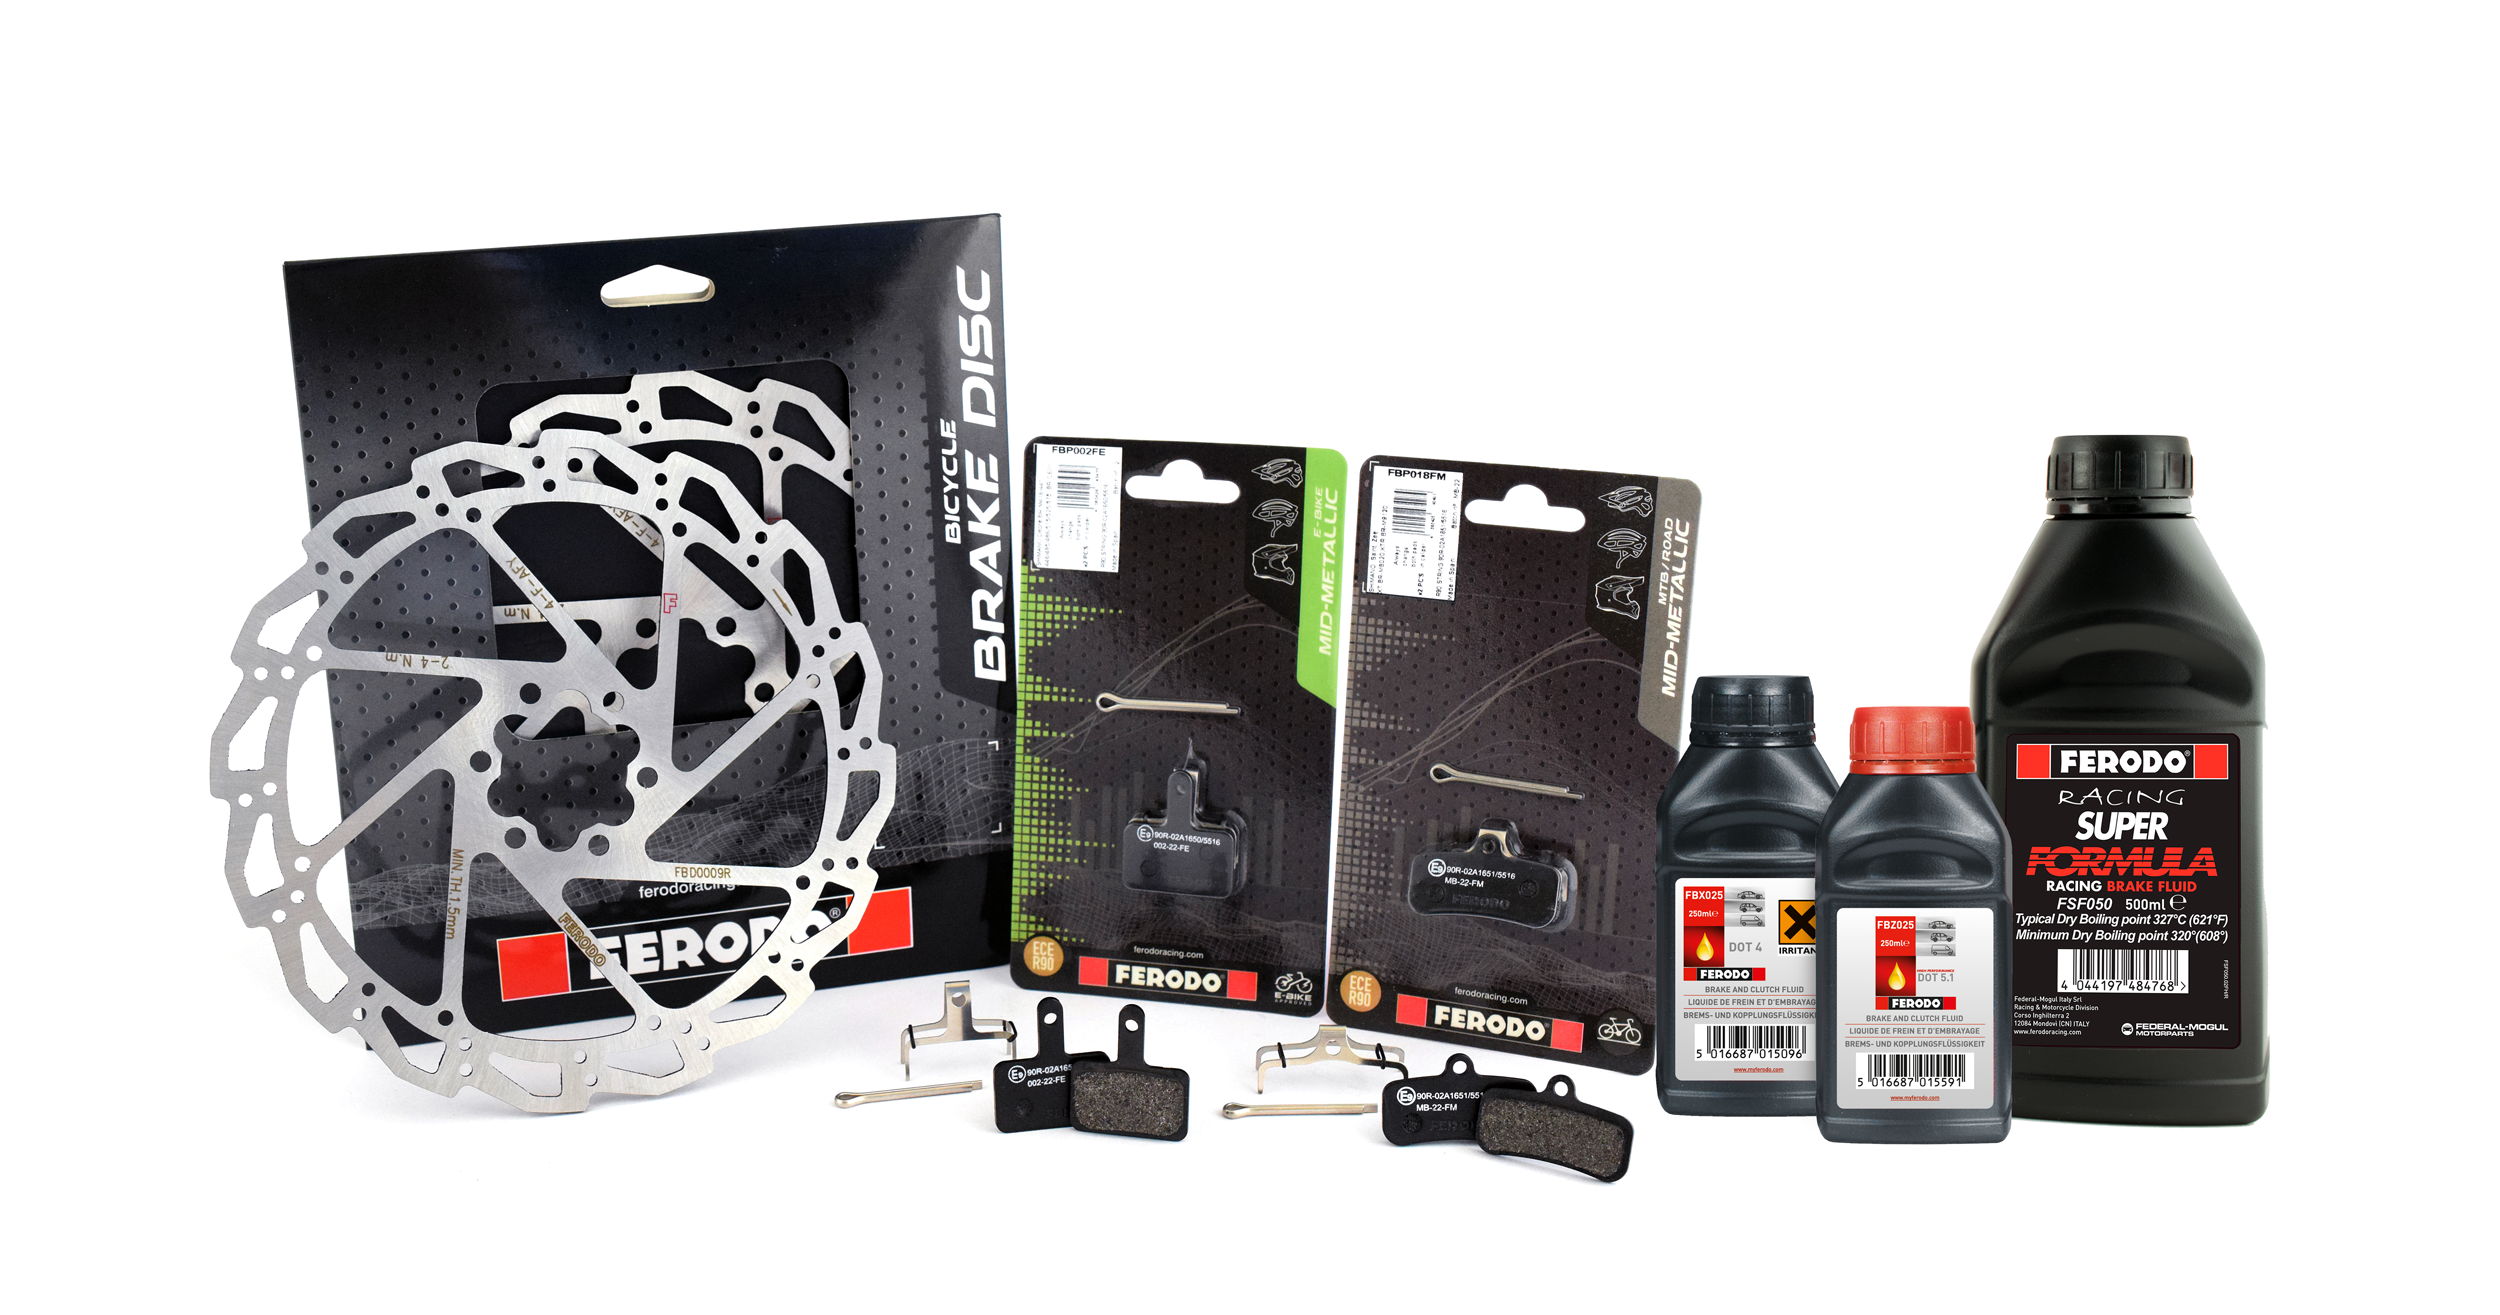 Ferodo Racing’s new range of top-performing brake pads, discs and fluid for conventional and electric bicycles